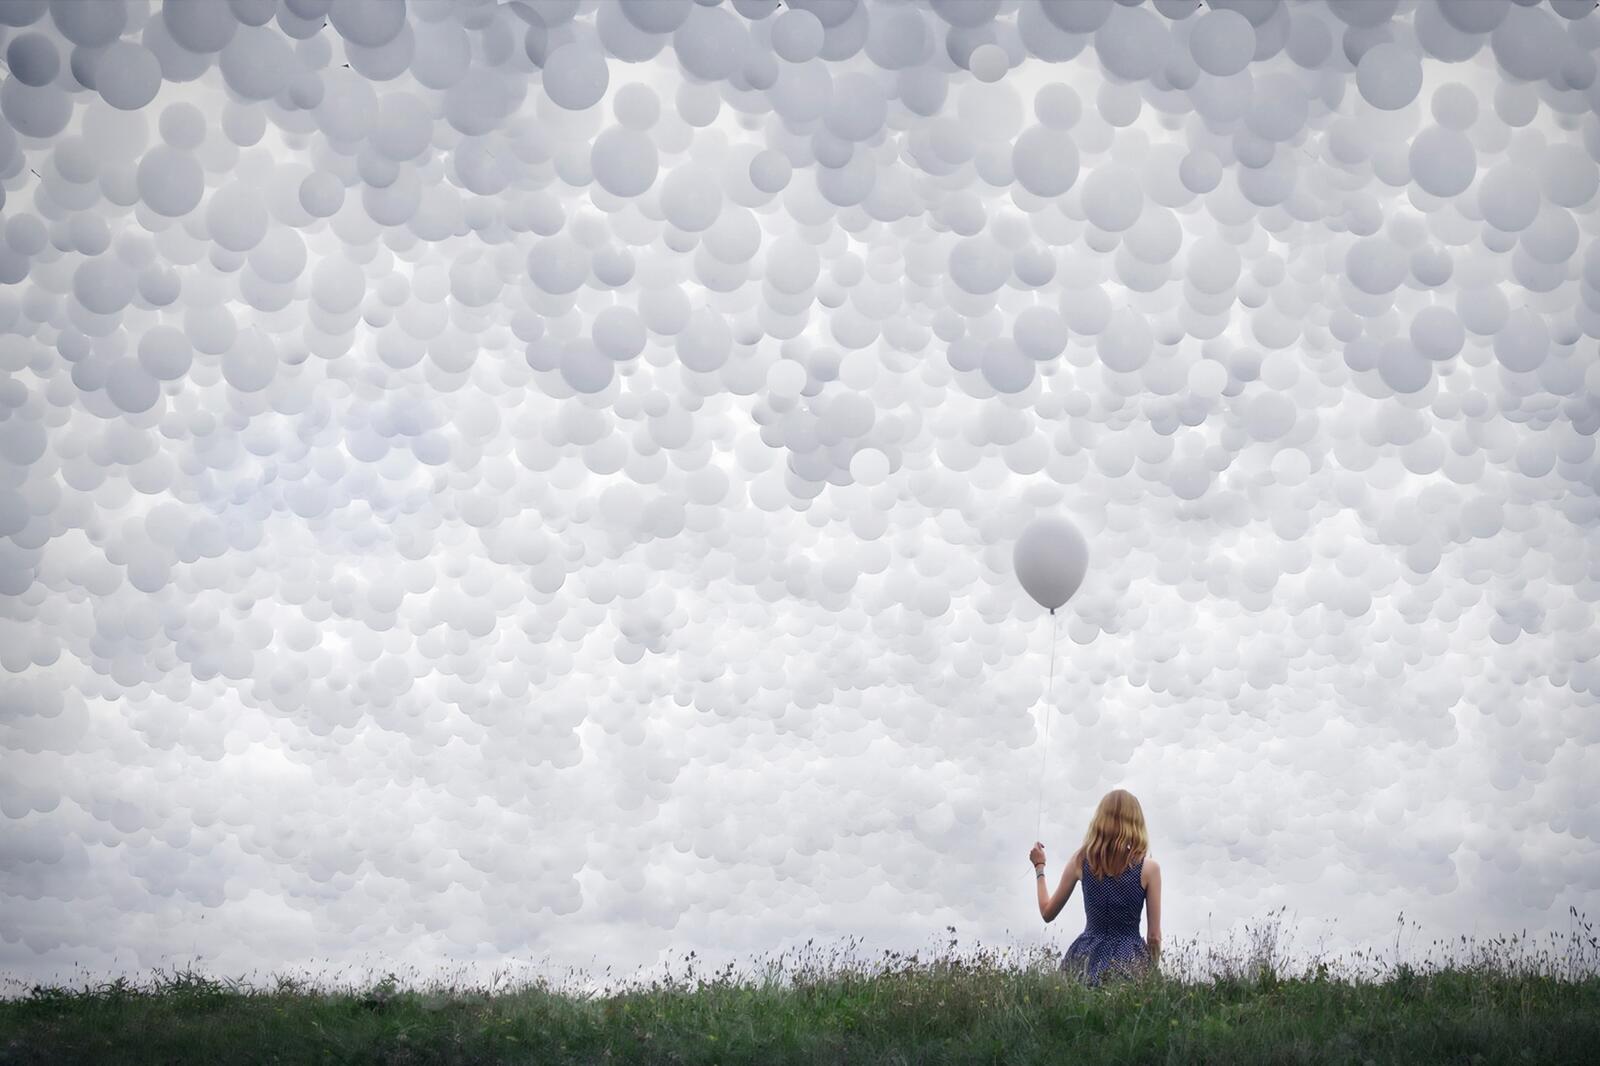 Wallpapers the woman balloons photography on the desktop